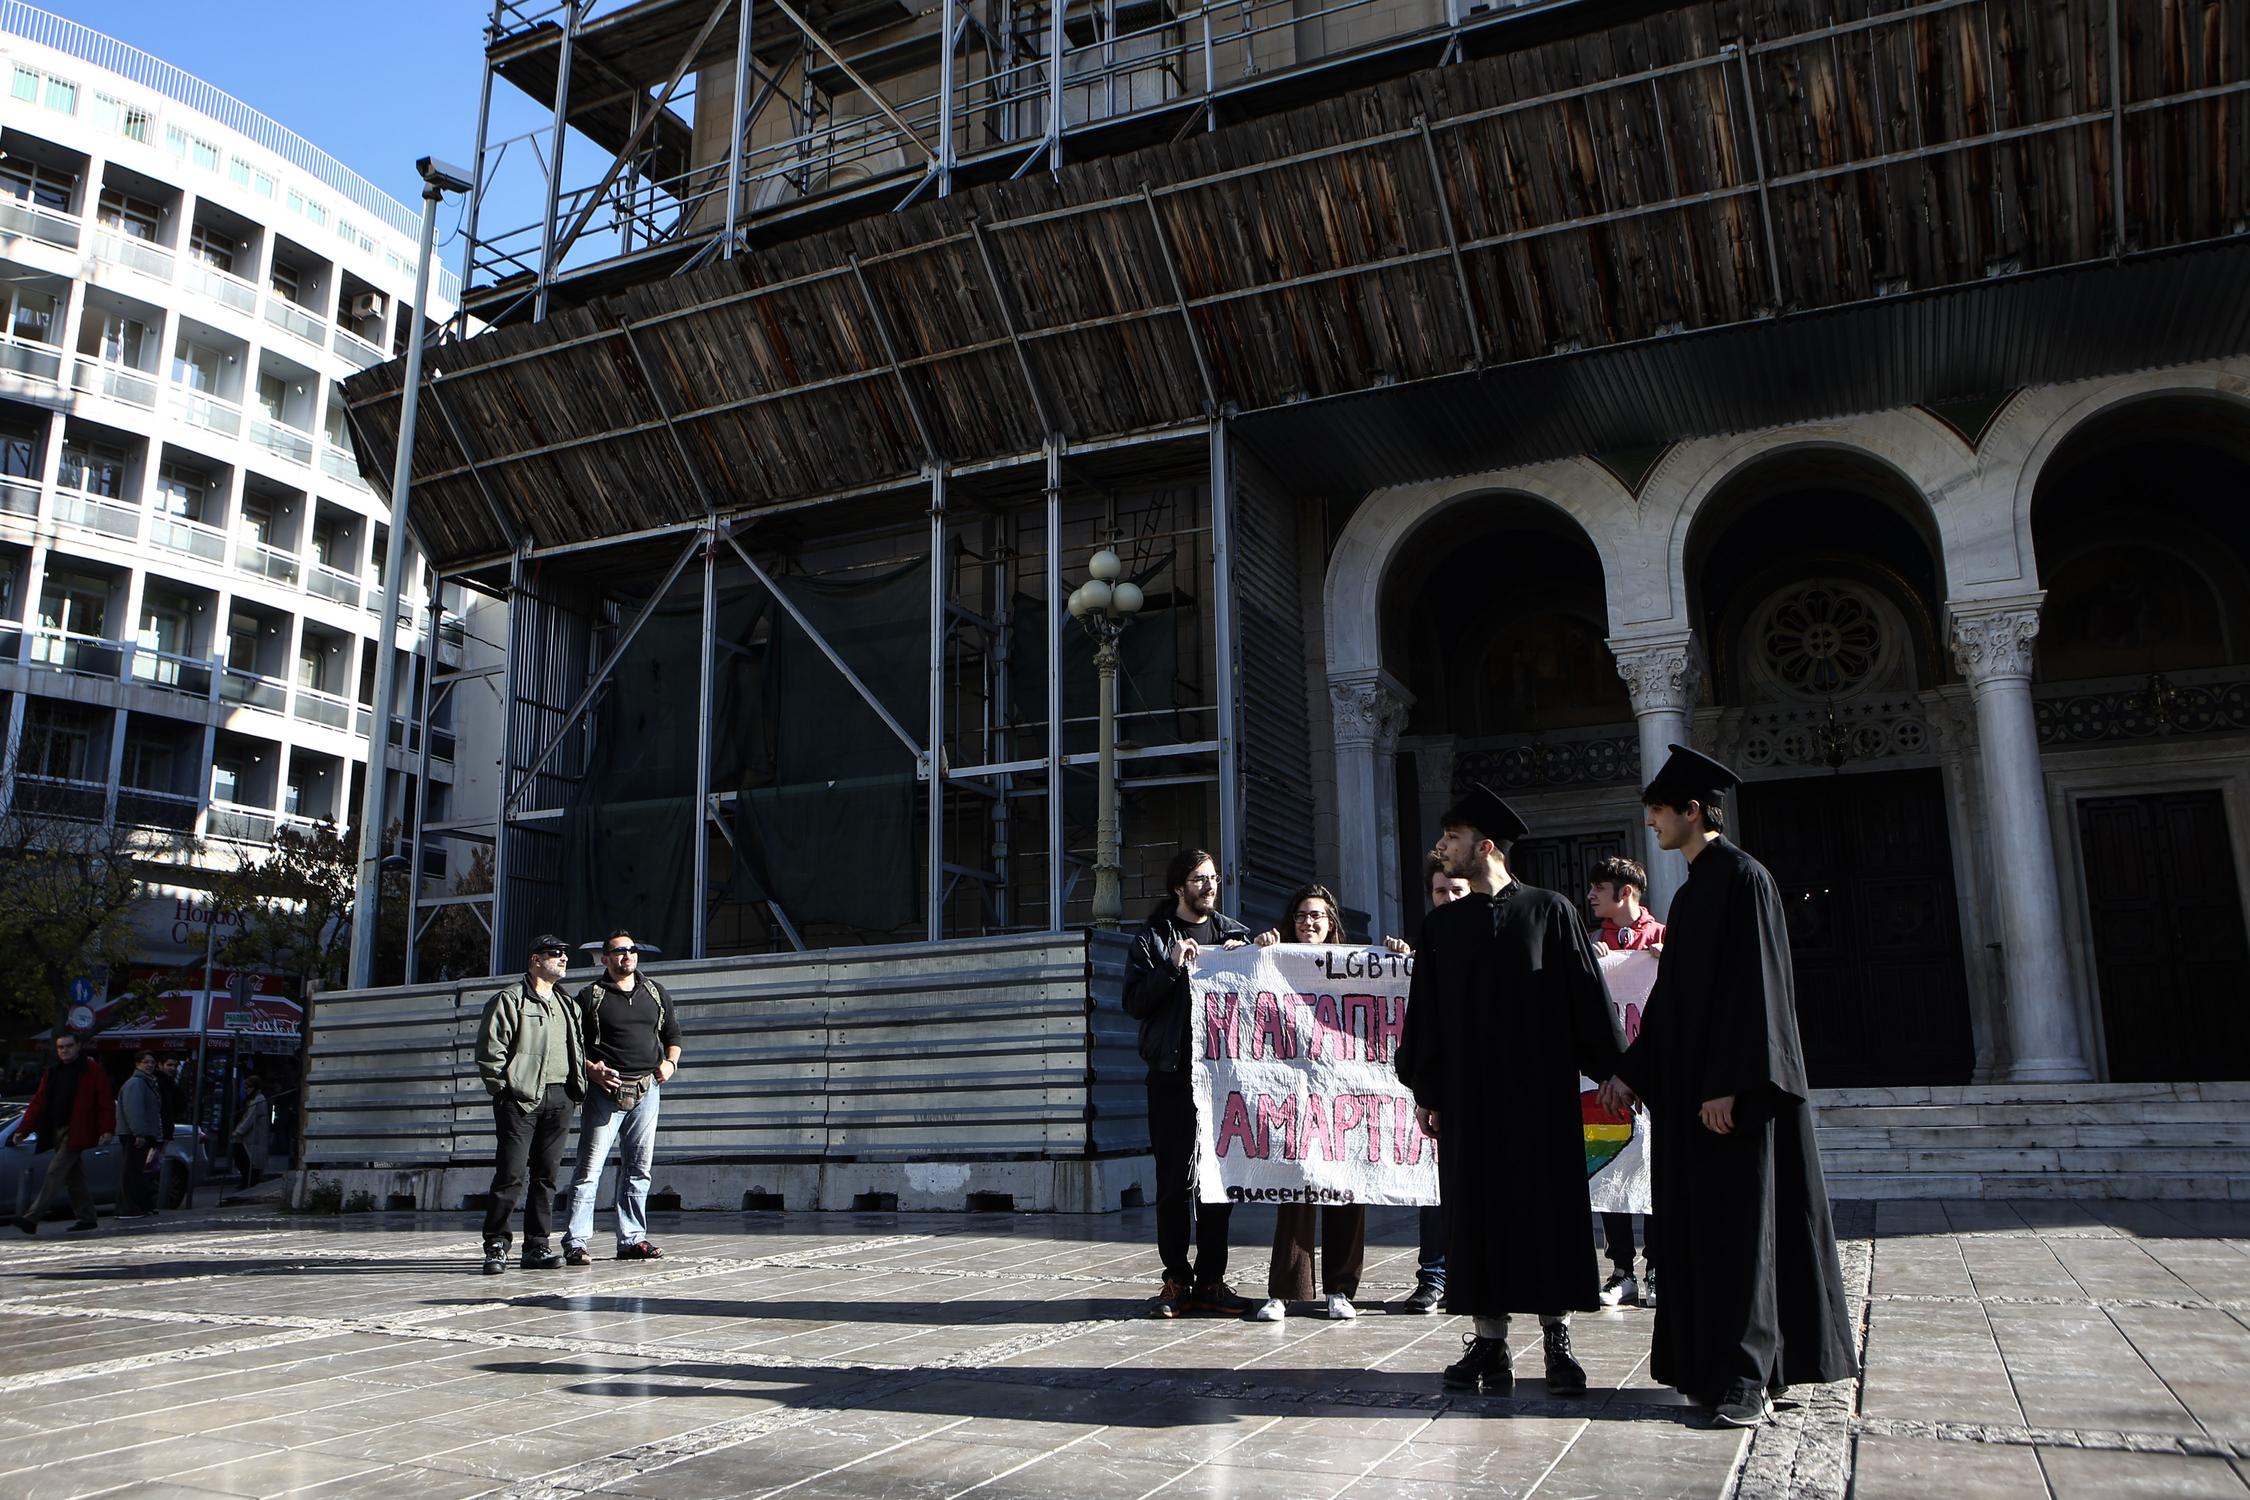 Demonstration by the LGBTQI activist team Queerborg outside the Cathedral of Athens, in Athens, on Dec. 22, 2015 / Διαμαρτυρία της ΛΟΑΤΚΙ ομάδας Queerborg έξω απο τη Μητρόπολη Αθηνών, στην Αθήνα, στις 22 Δεκεμβρίου, 2015